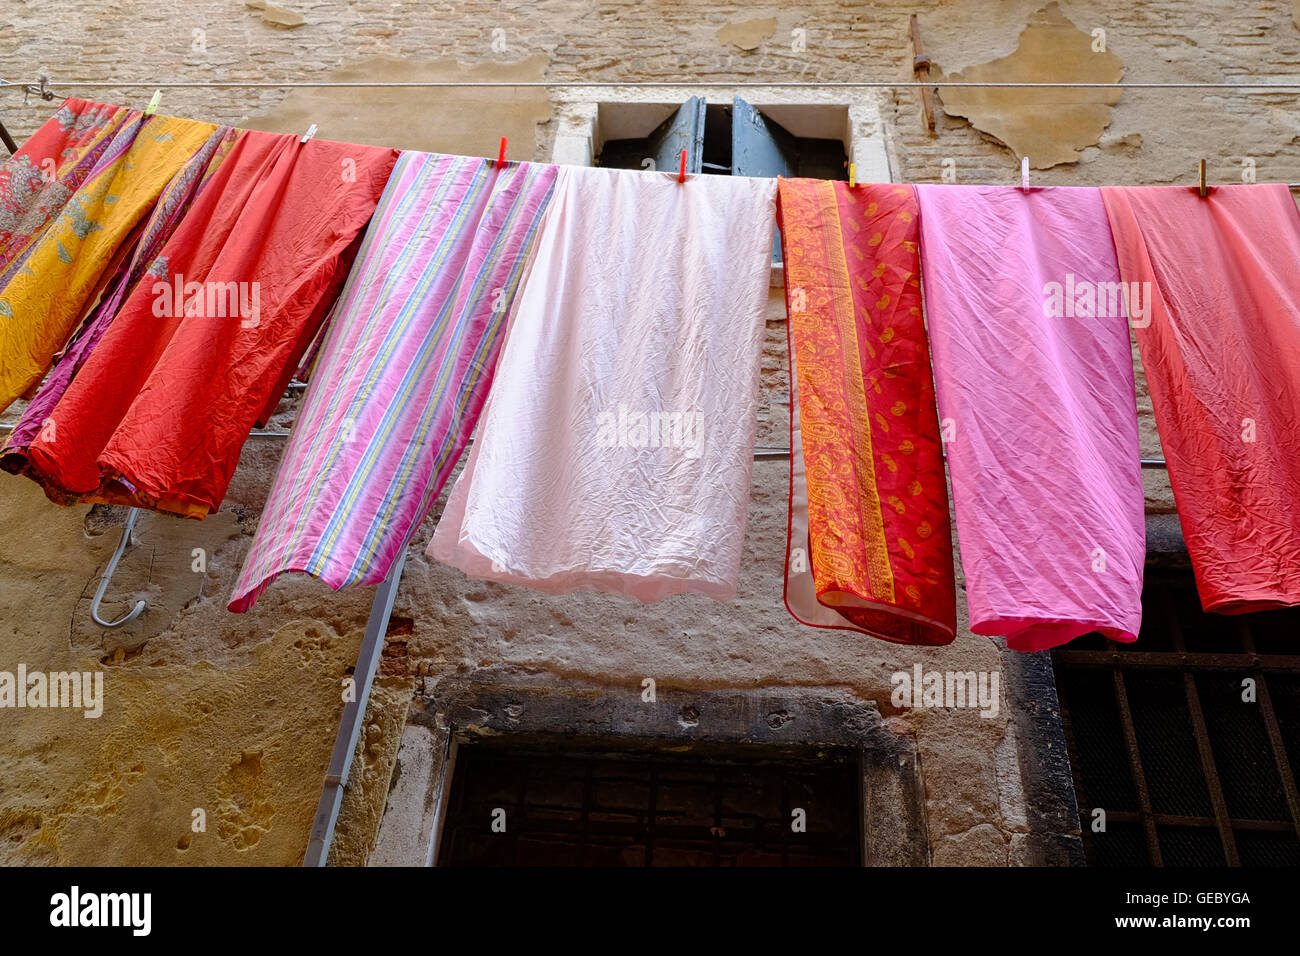 Colourful laundry hanging on a clothes line Venice Italy Stock Photo